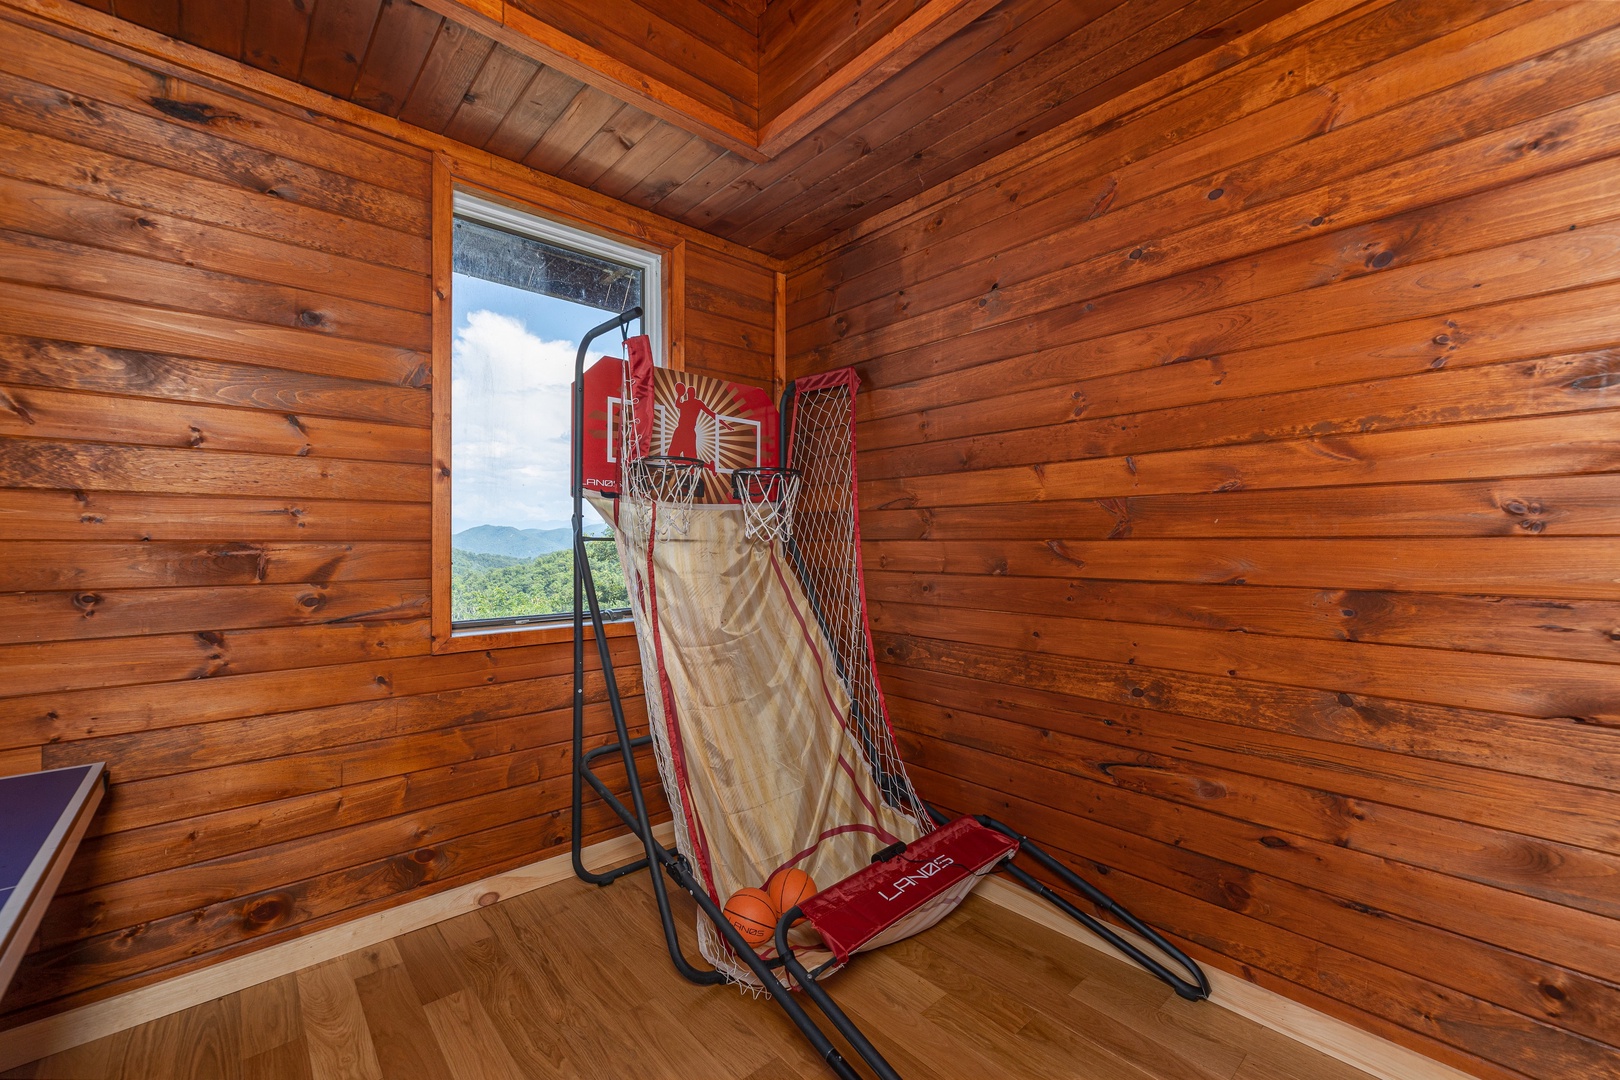 Basketball game at Sky View, A 4 bedroom cabin rental in Pigeon Forge